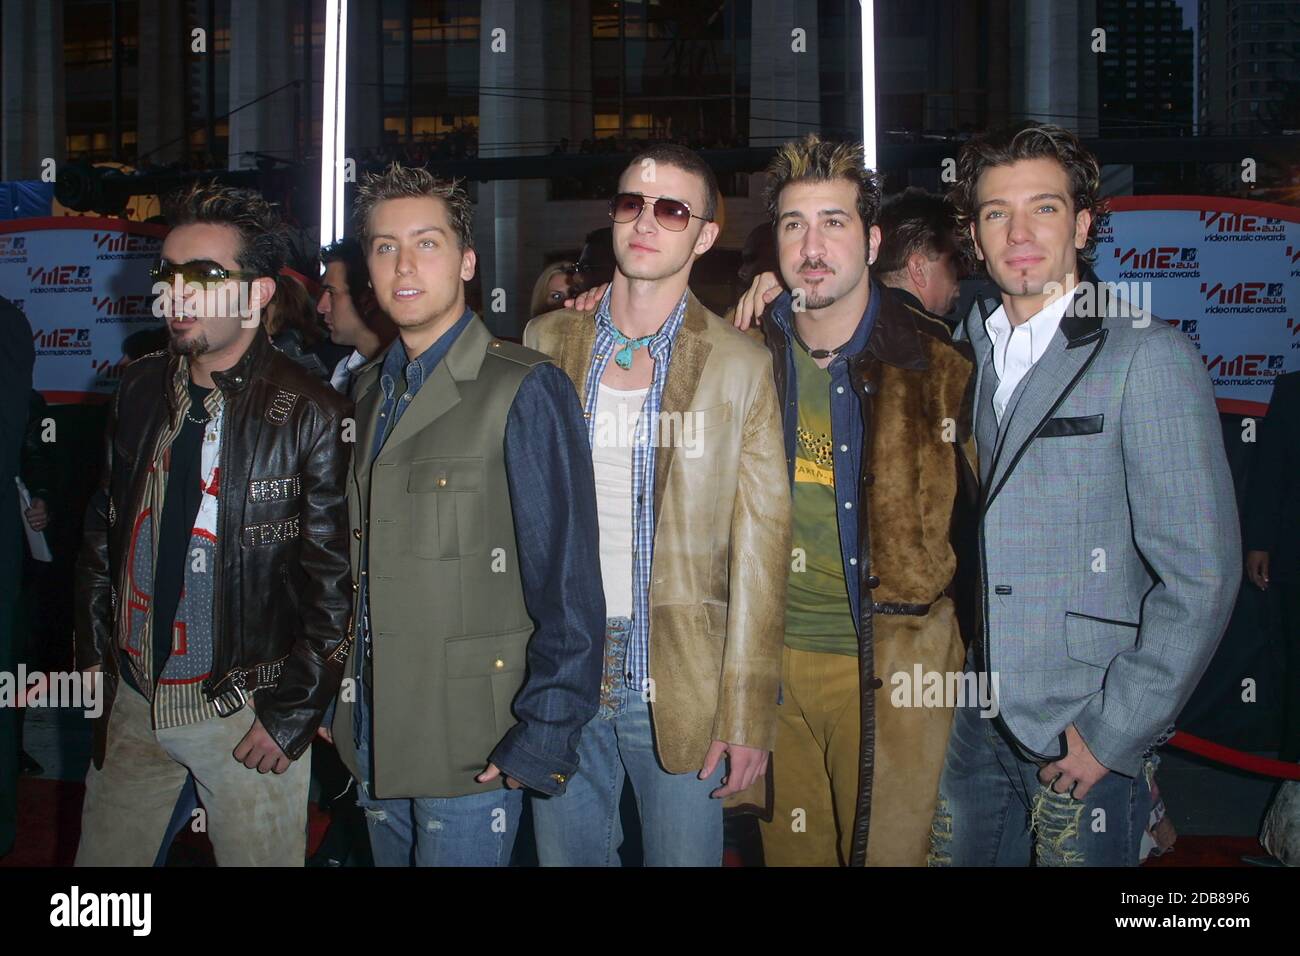 Joey Fatone, Chris Kirkpatrick, Justin Timberlake, Lance Bass, and JC Chasez of N'Sync arriving at the 2001 MTV Video Music Awards held at the Metropo Stock Photo